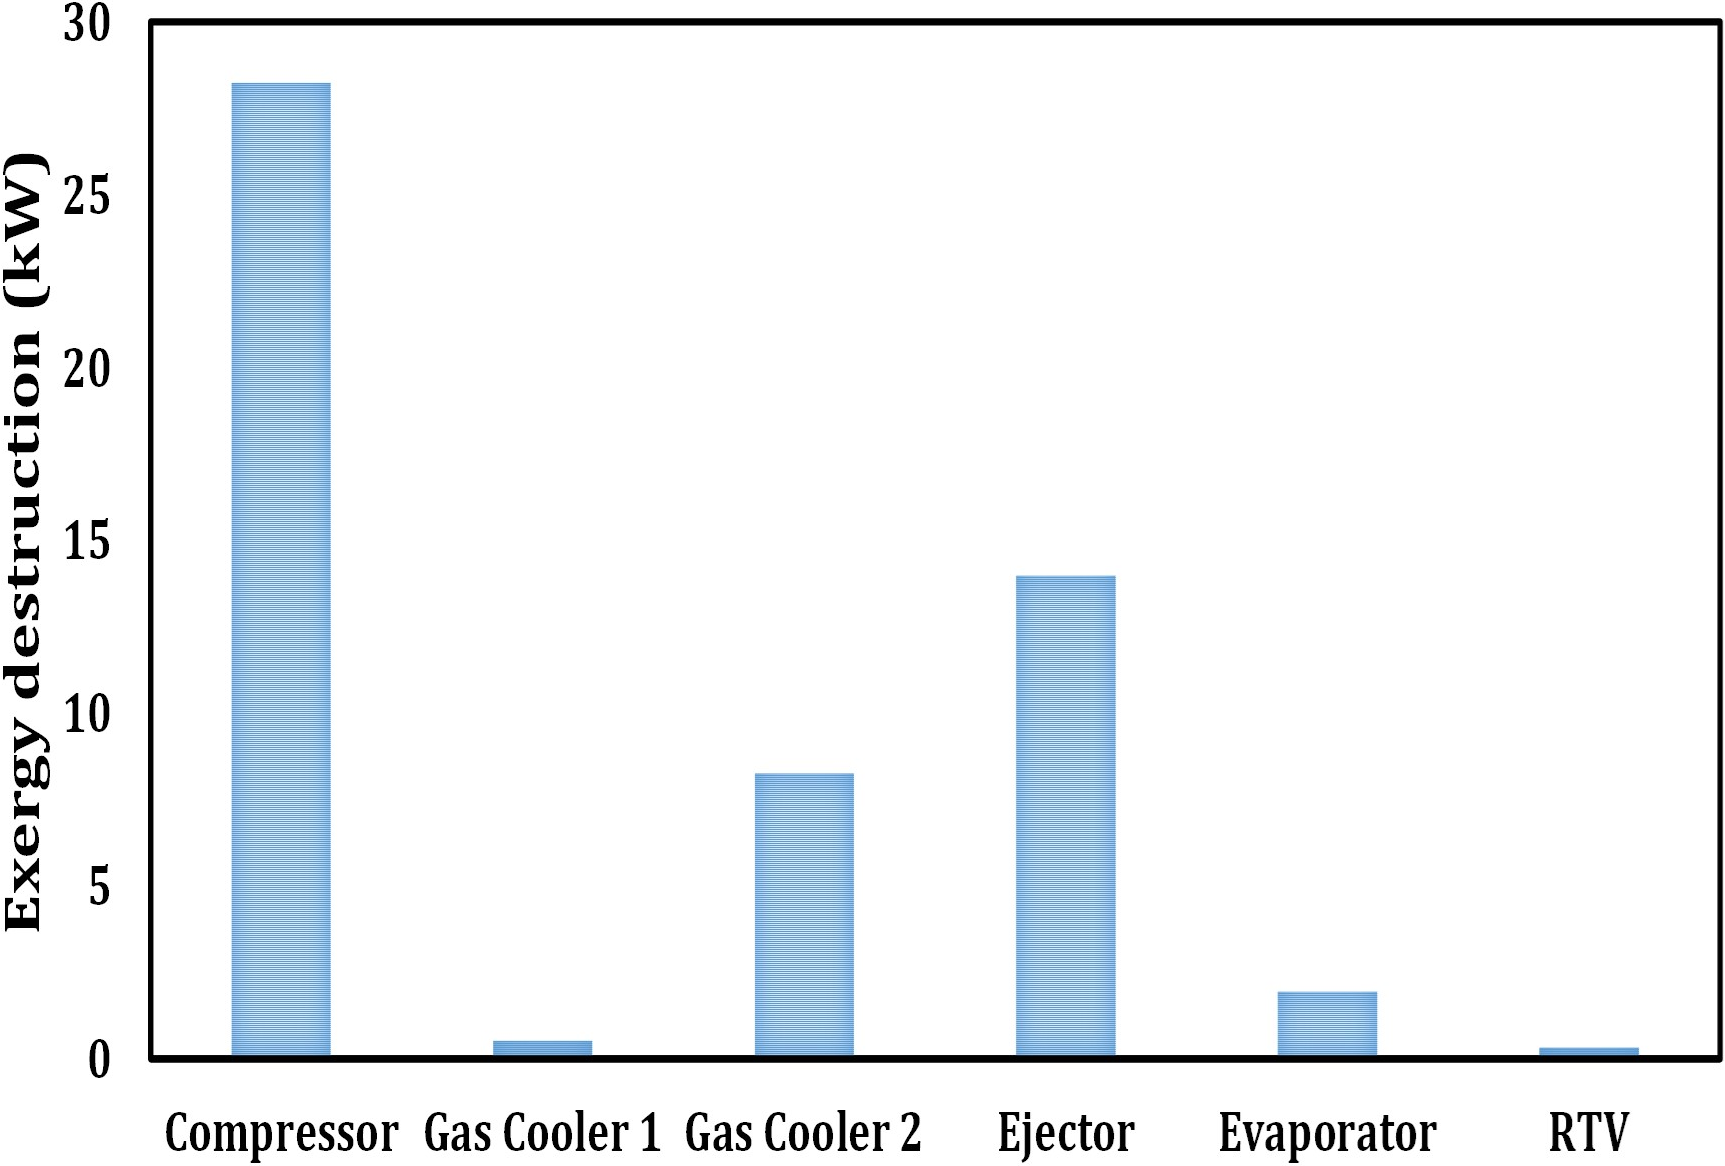 Exergy destruction in different components of the ERS